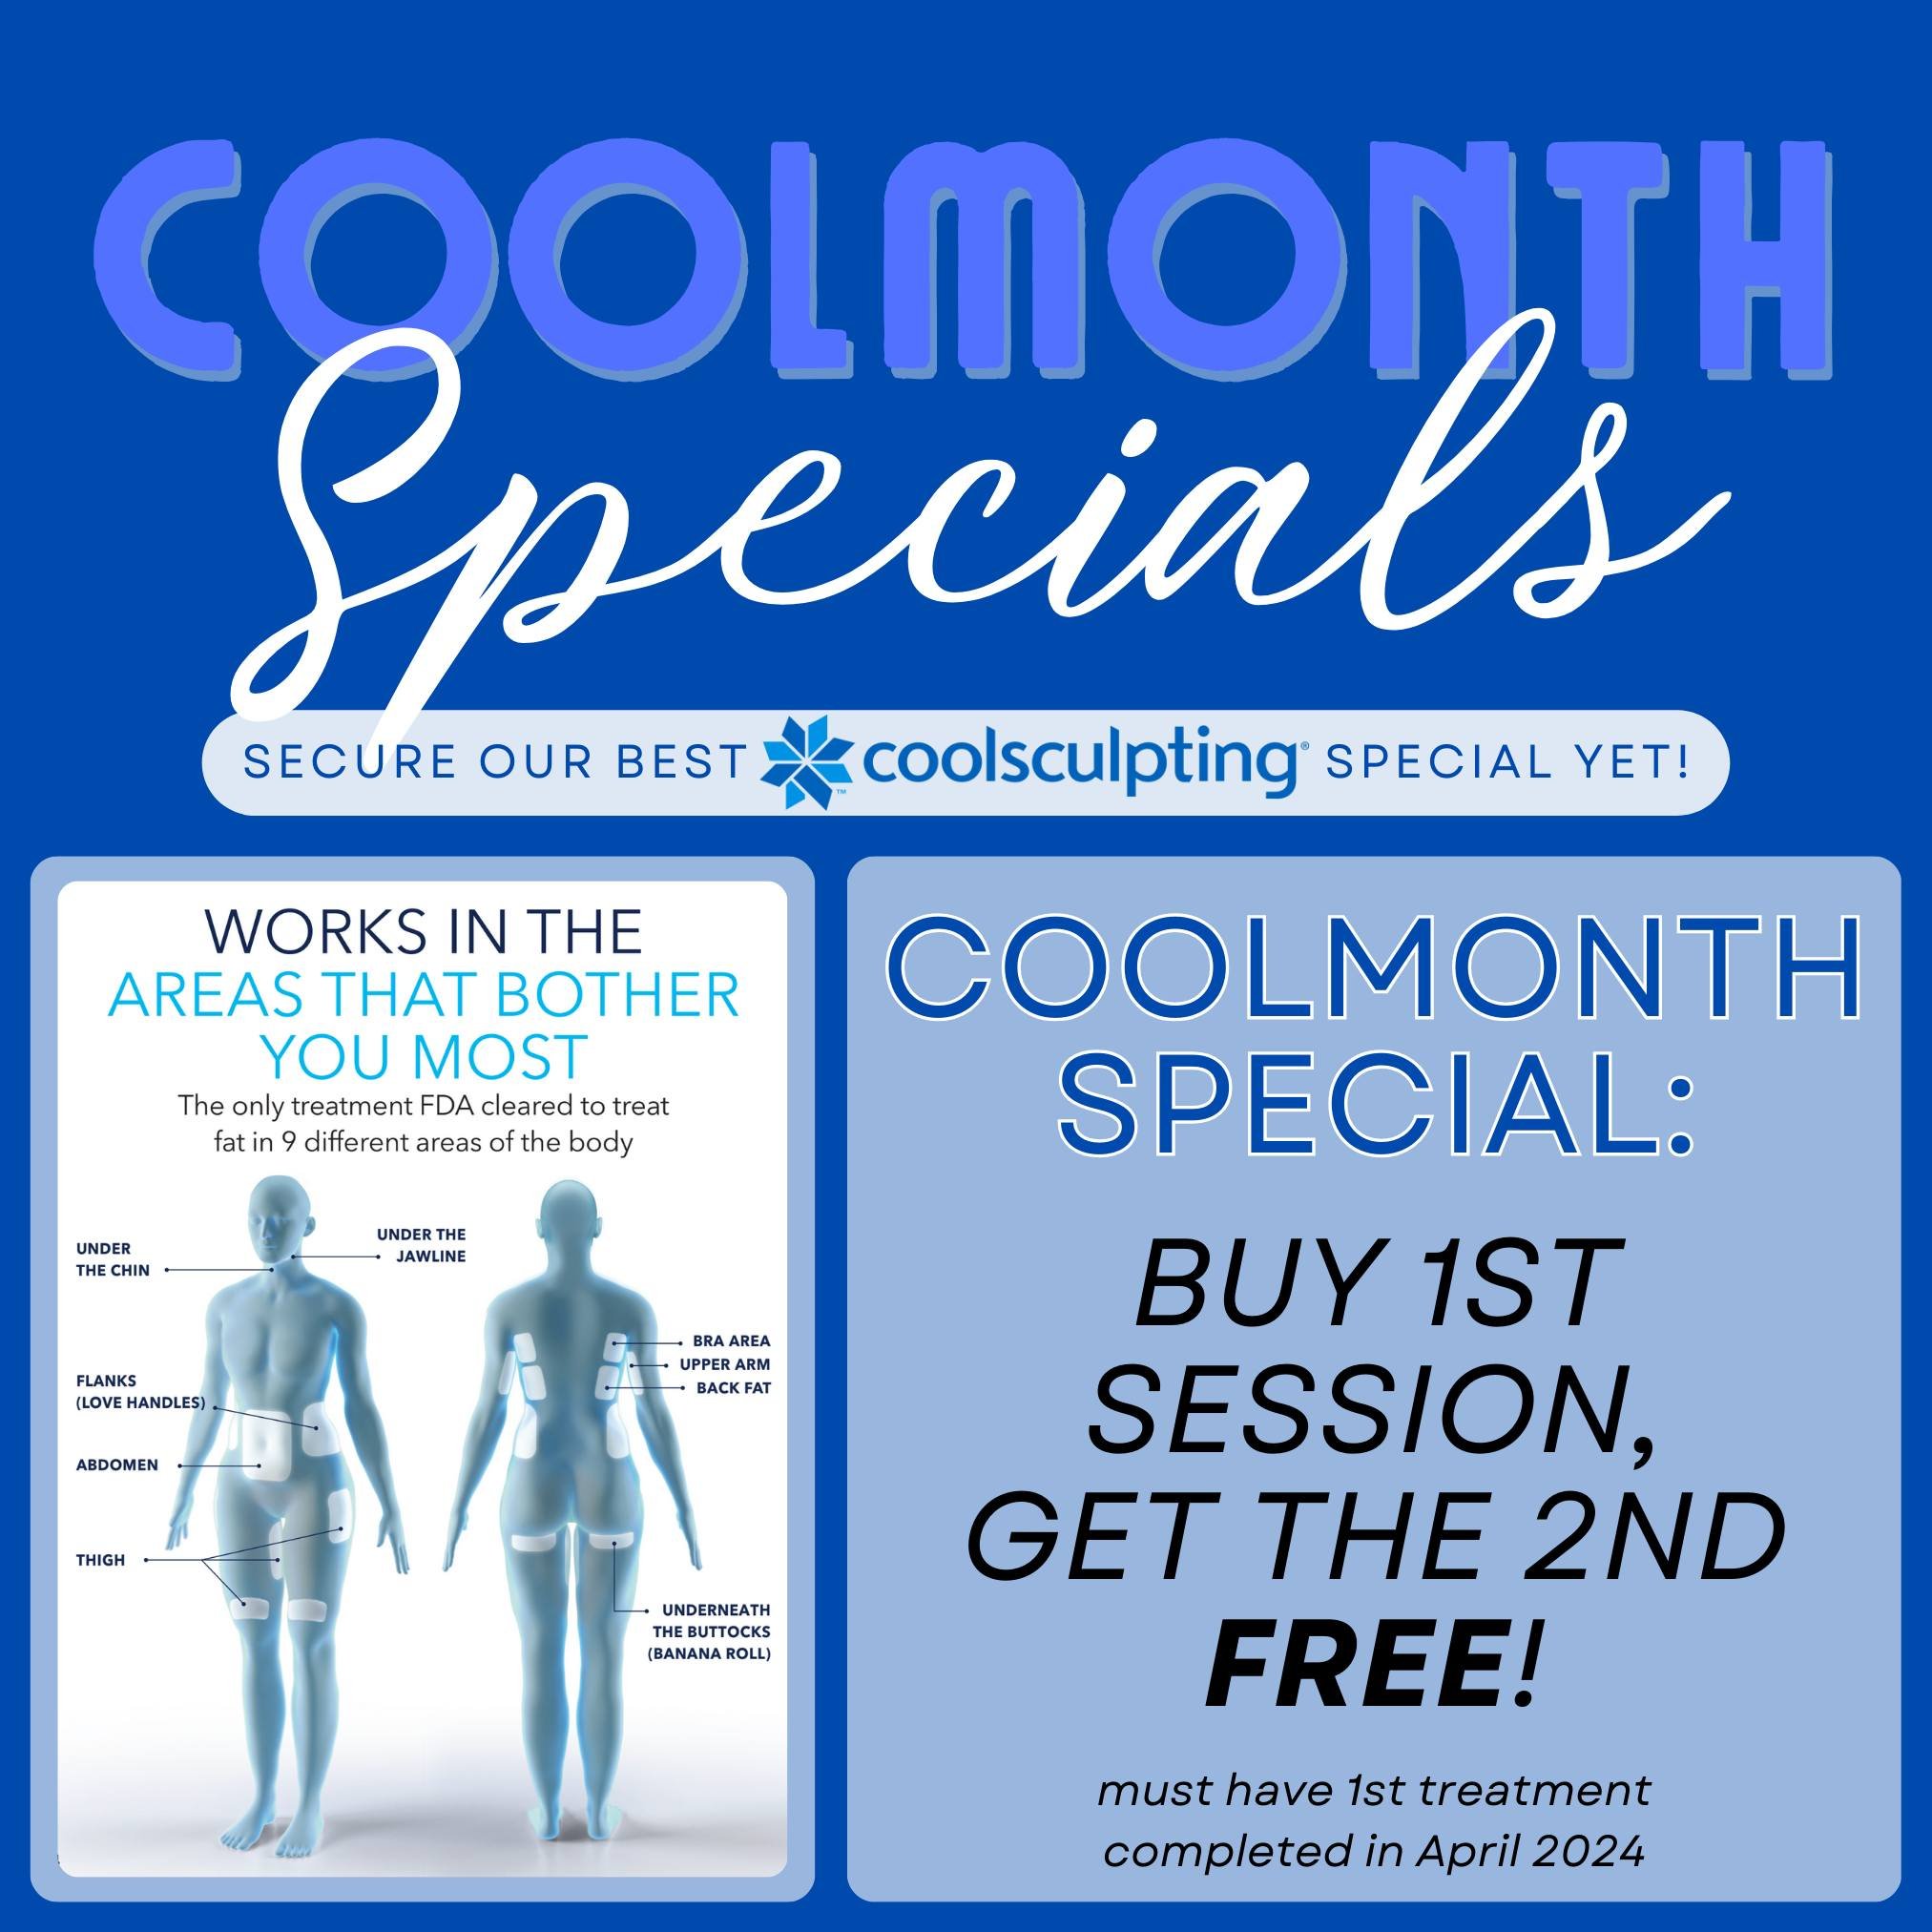 Make the most of our CoolSculpting Elite specials
ALL MONTH LONG! ❄️

April is CoolMonth at Infinity MedSpa in Charlotte, NC!

COOLMONTH SPECIAL:
💙 Buy 1st session, get 2nd session FREE!

*Must have 1st treatment completed in April 2024
*Cannot be c